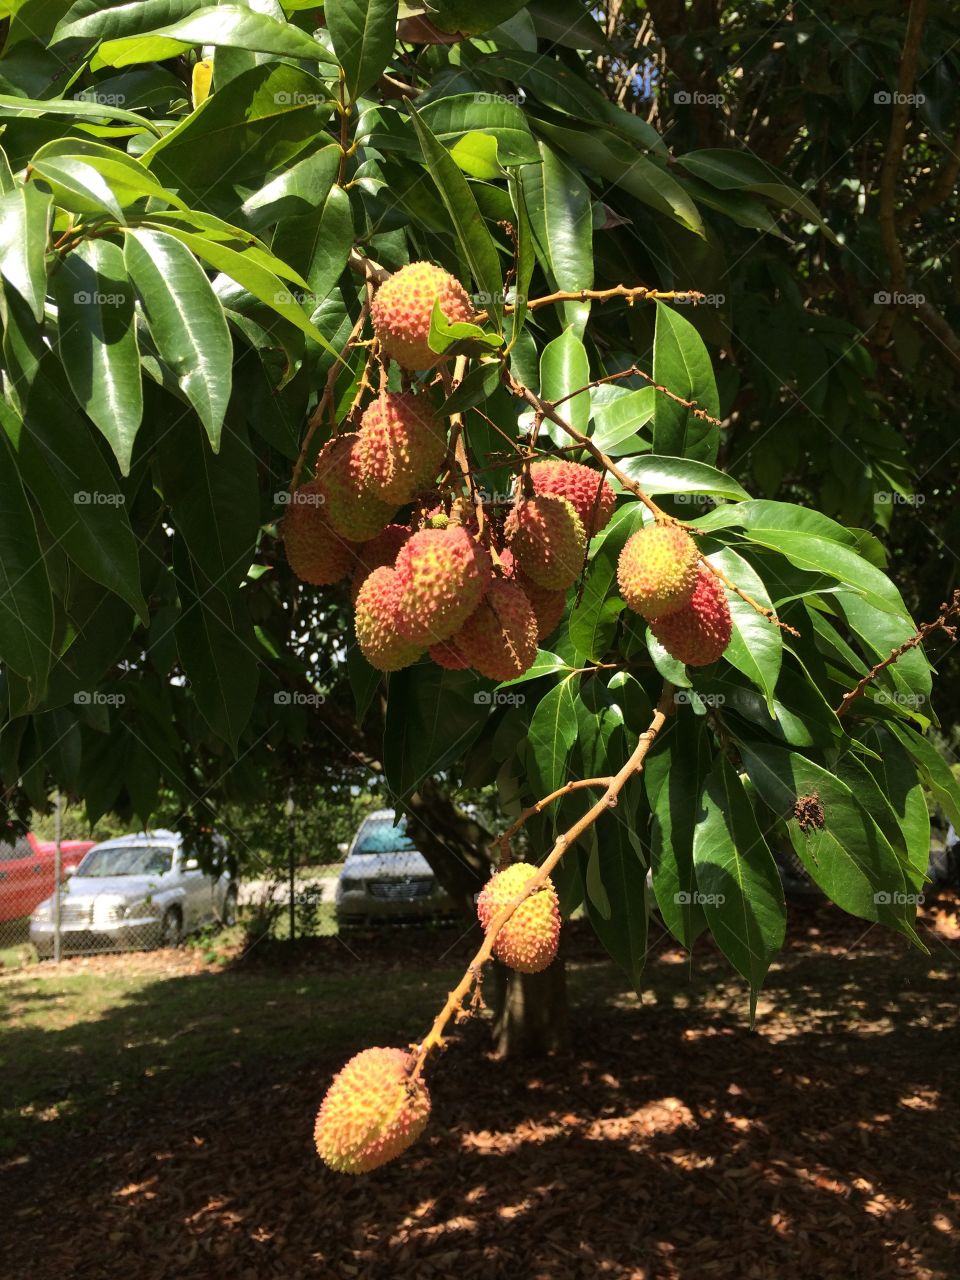 Lychee. Lychee fruit hanging from trees